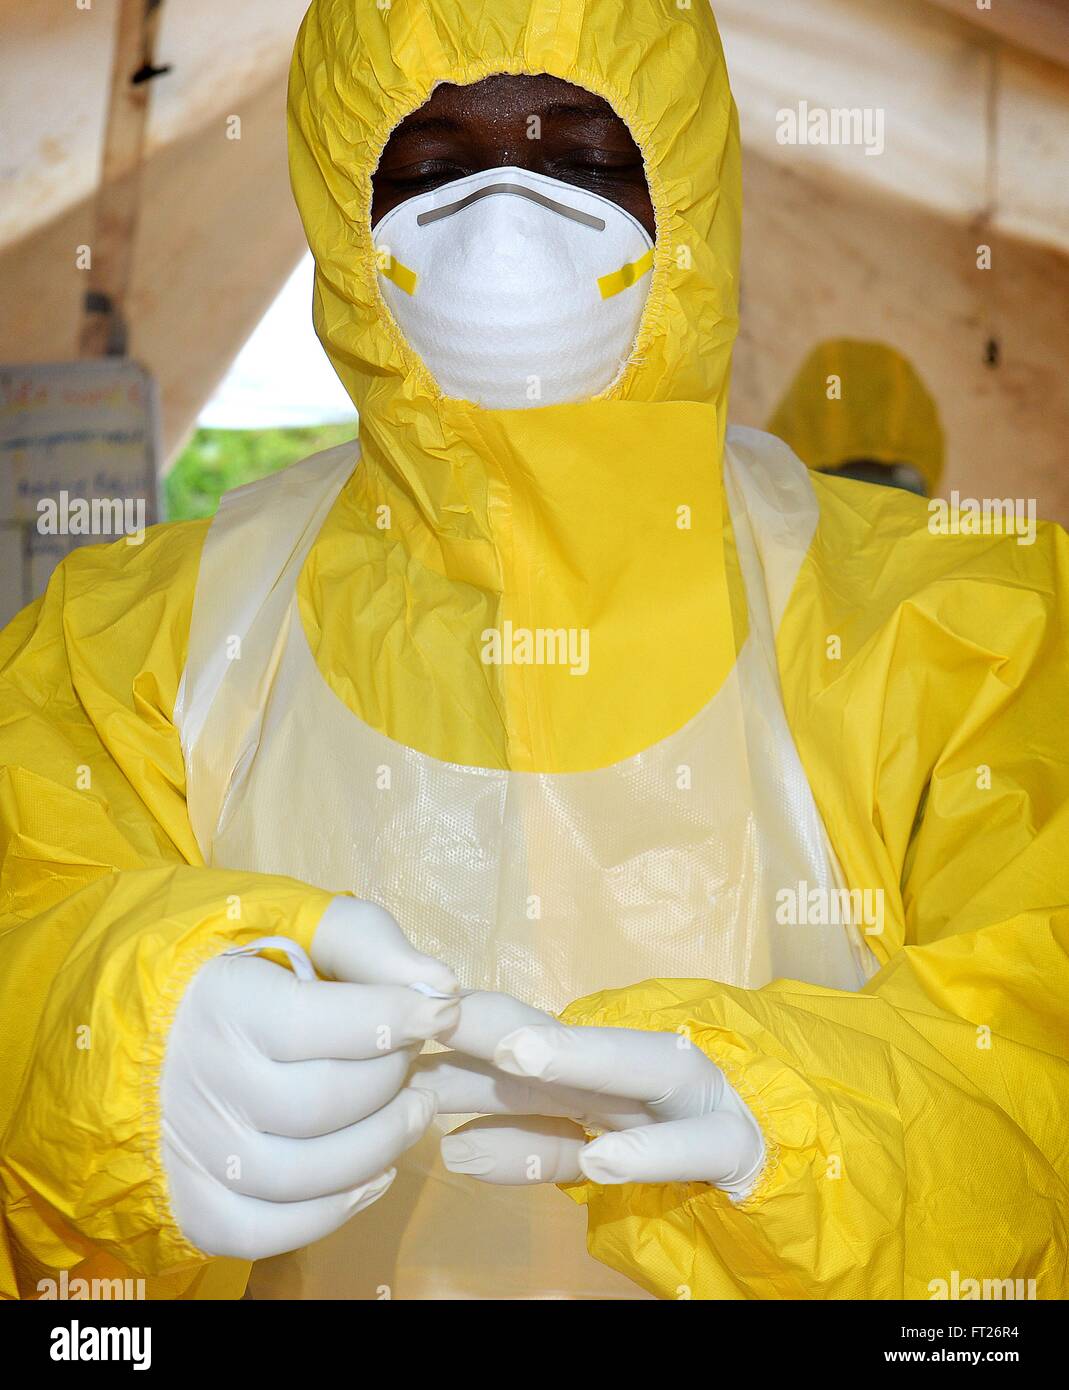 A medical team member puts on personal protective gear at the Ebola clinic at the Wilberforce Barracks November 7, 2014 in Freetown, Sierra Leone. The Ebola clinic is a joint operation with the British armed forces and Republic of Sierra Leone Armed Forces. Stock Photo